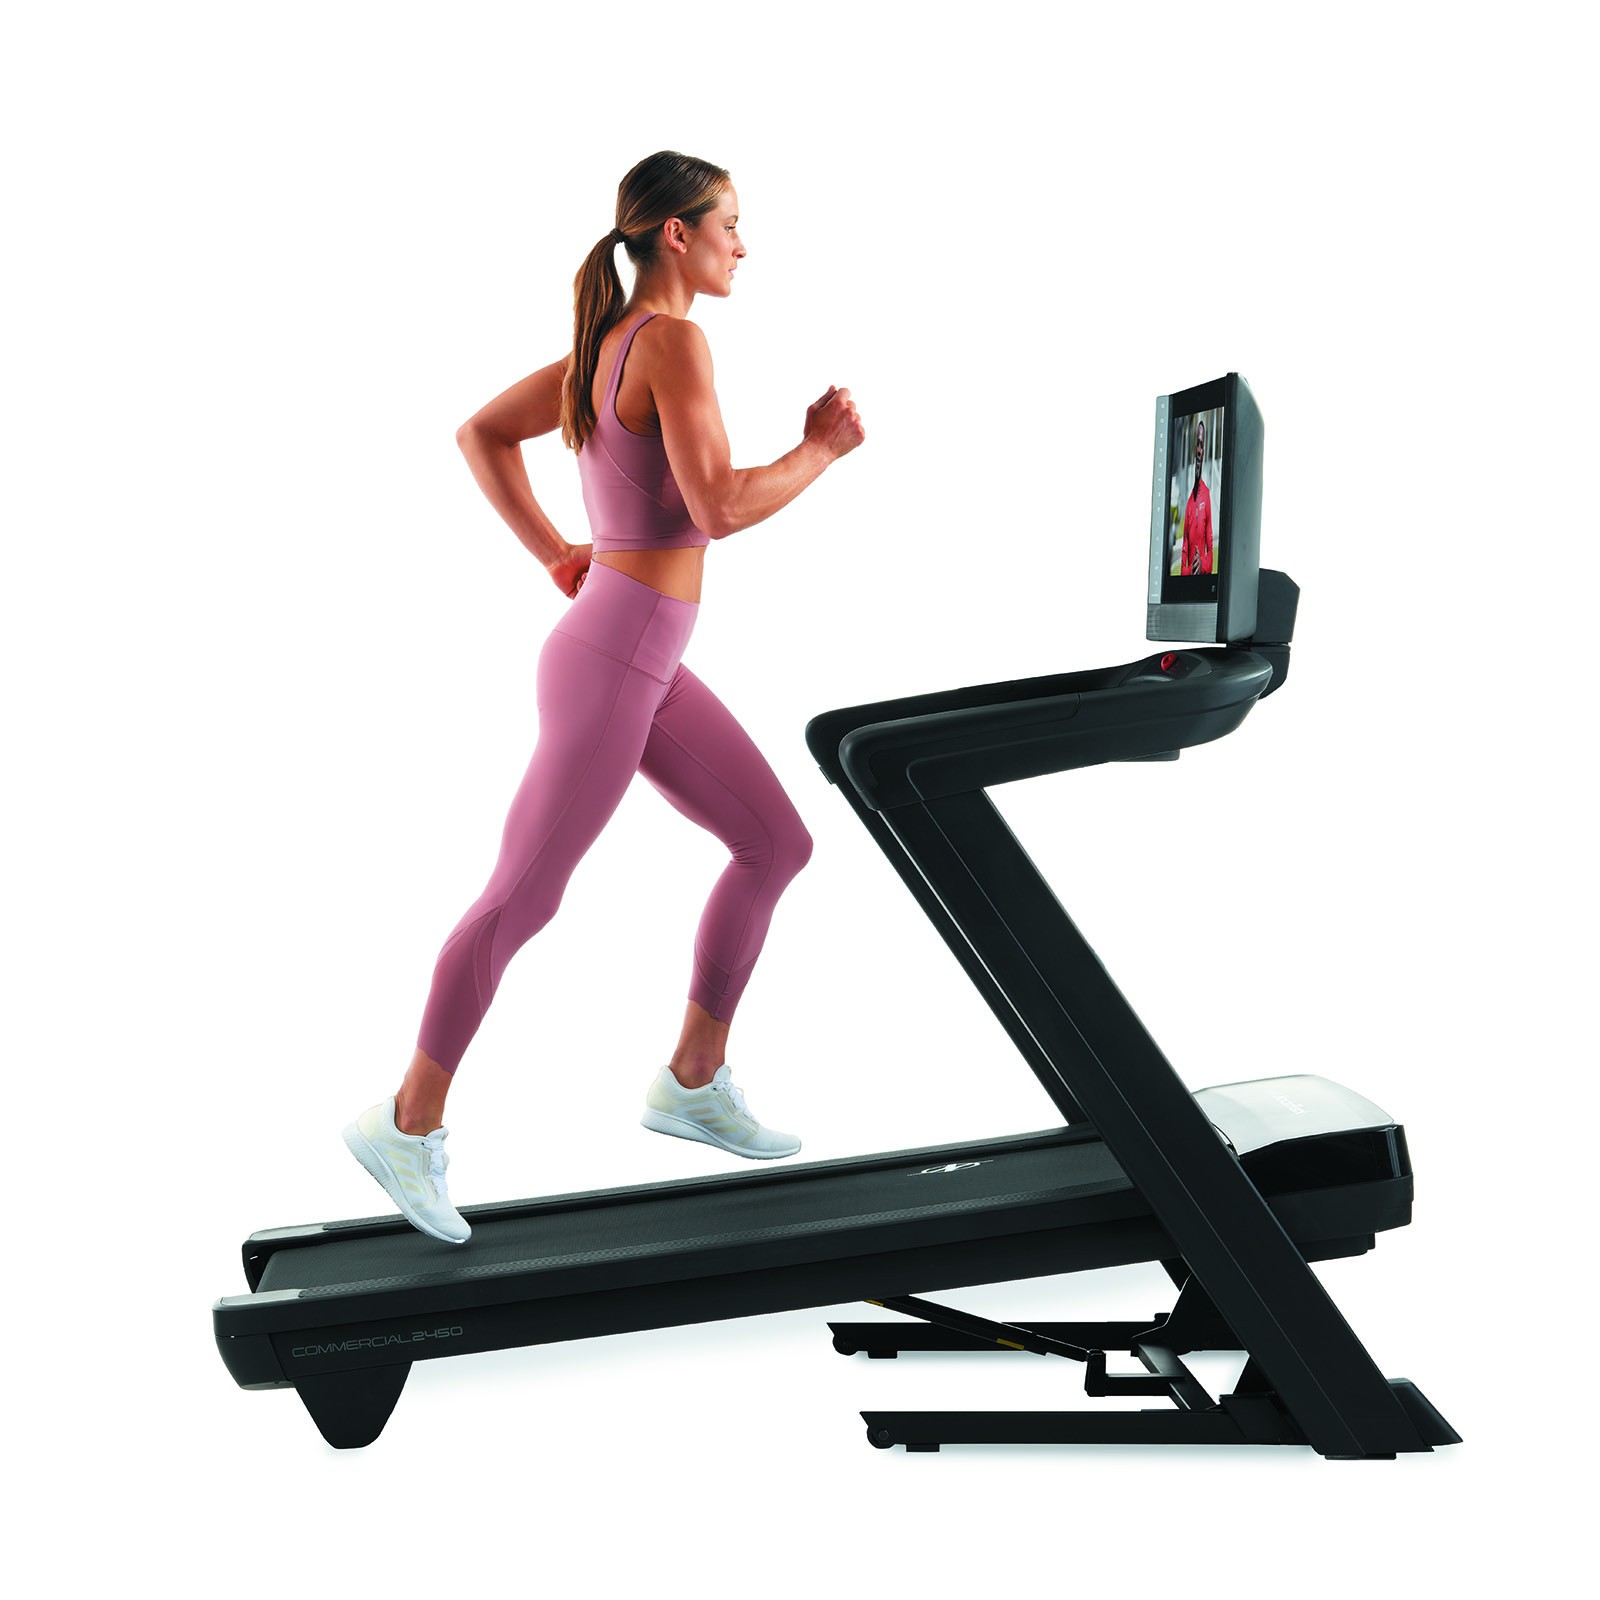 NordicTrack 2450 Treadmill – in use inclined